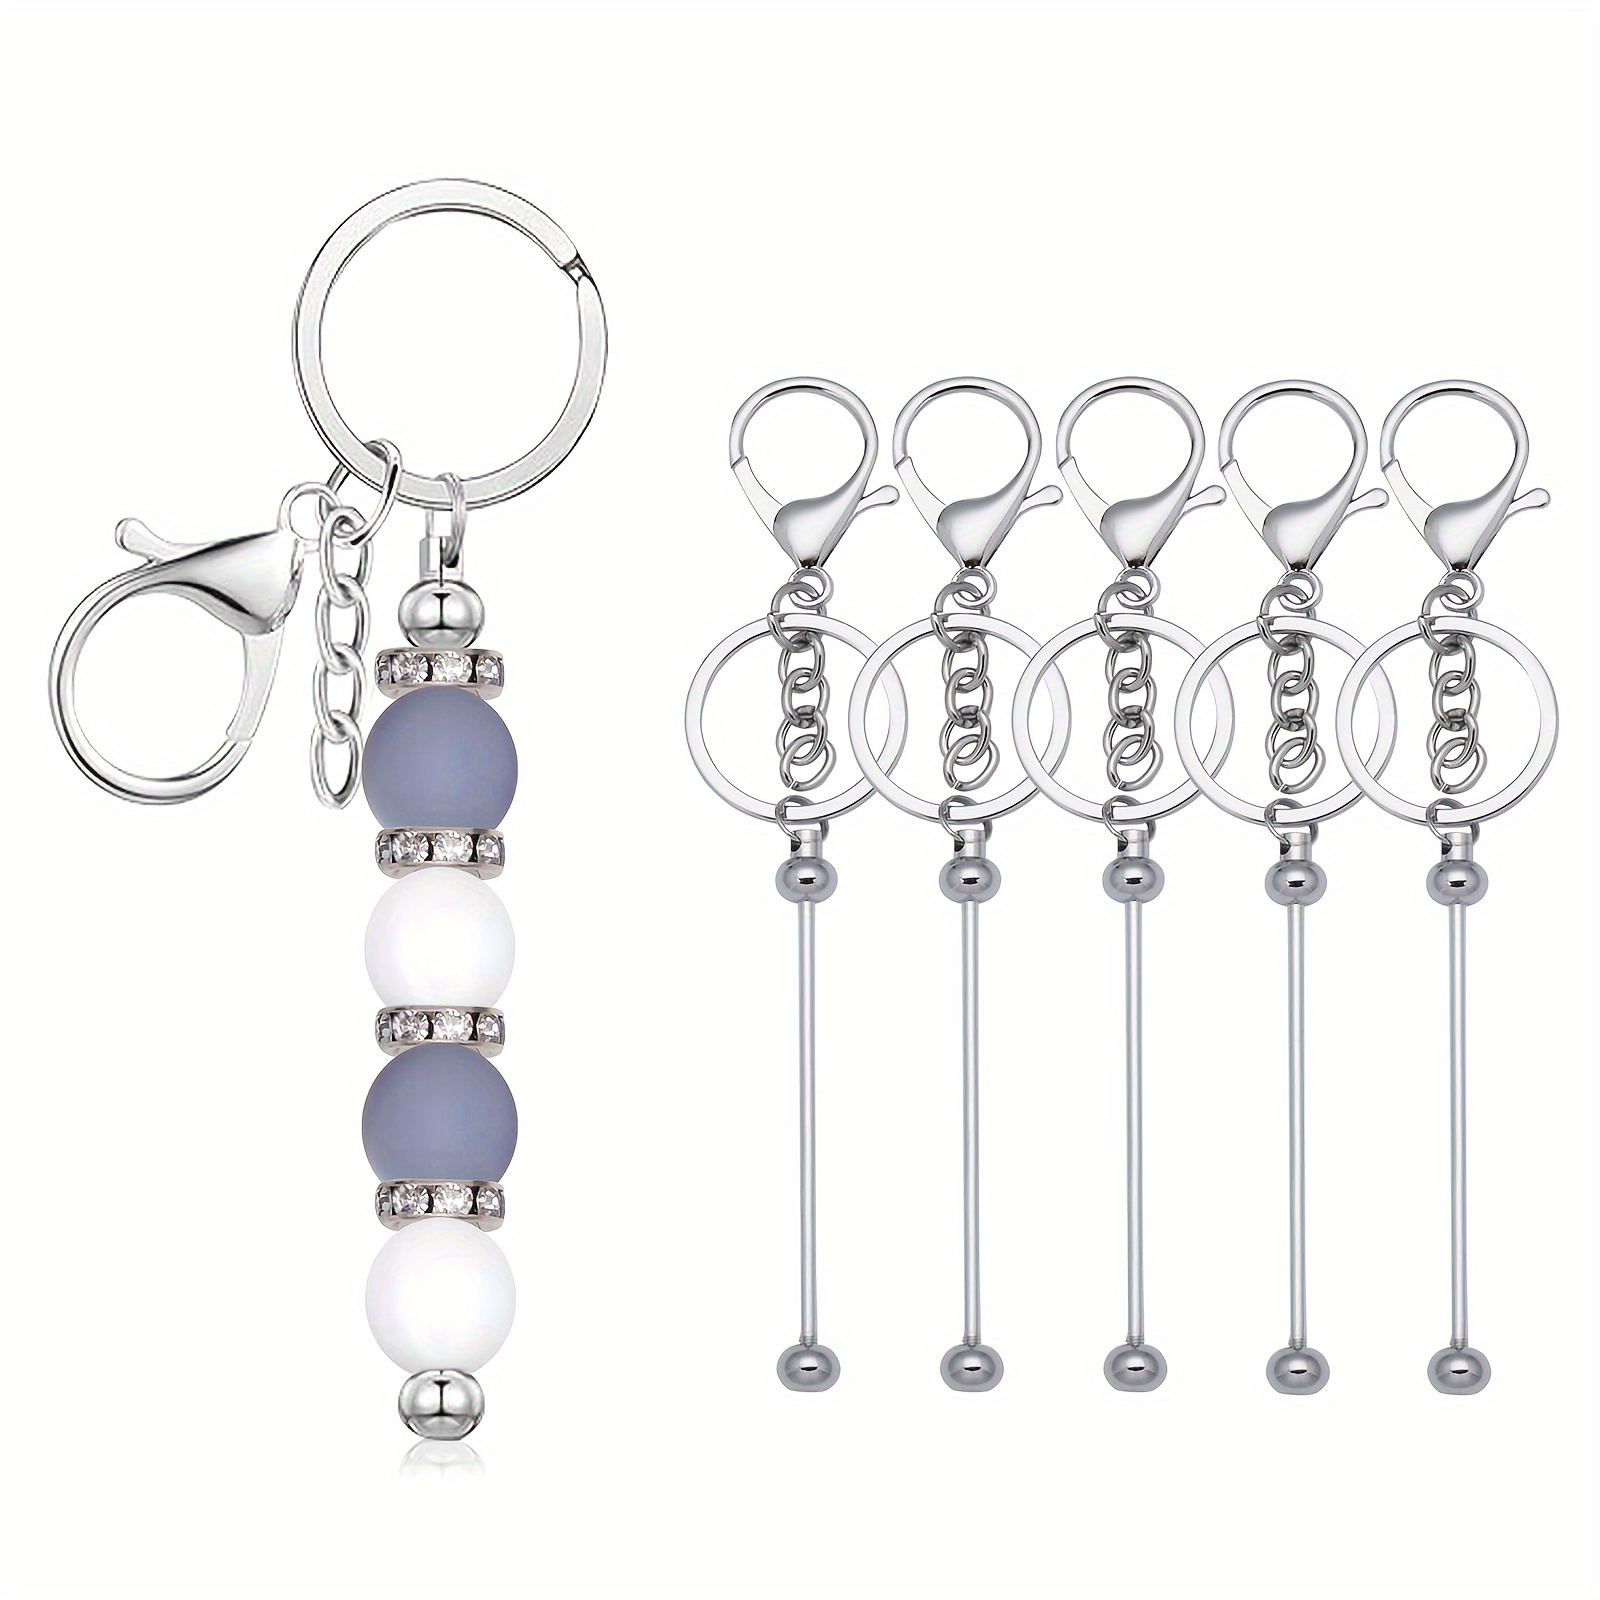 Anezus Key Chain Clip Hook with Swivel Snap Hooks UK